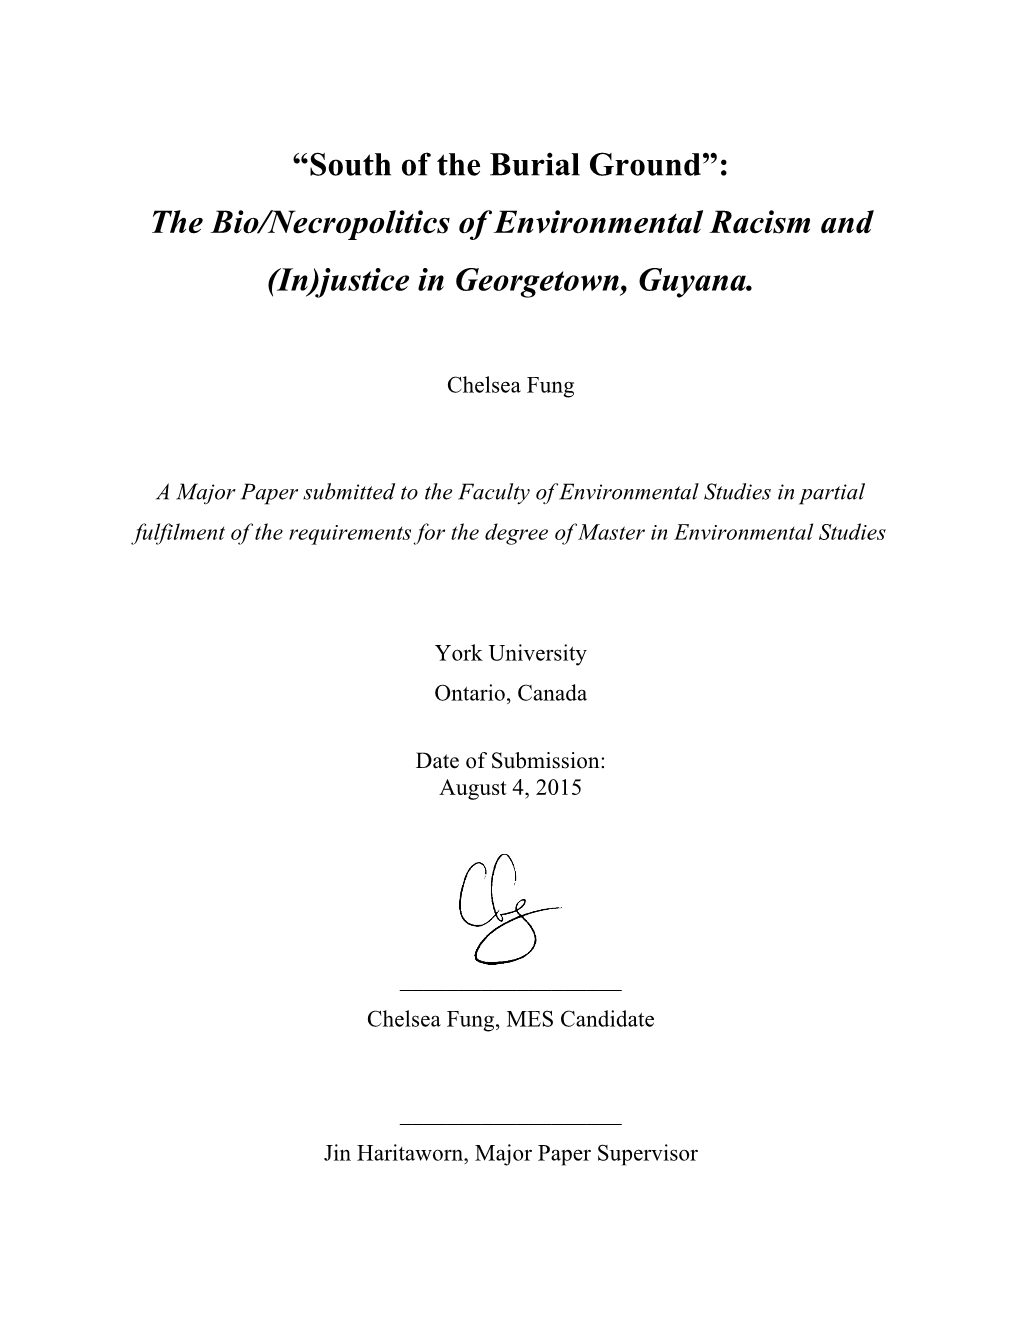 The Bio/Necropolitics of Environmental Racism and (In)Justice in Georgetown, Guyana